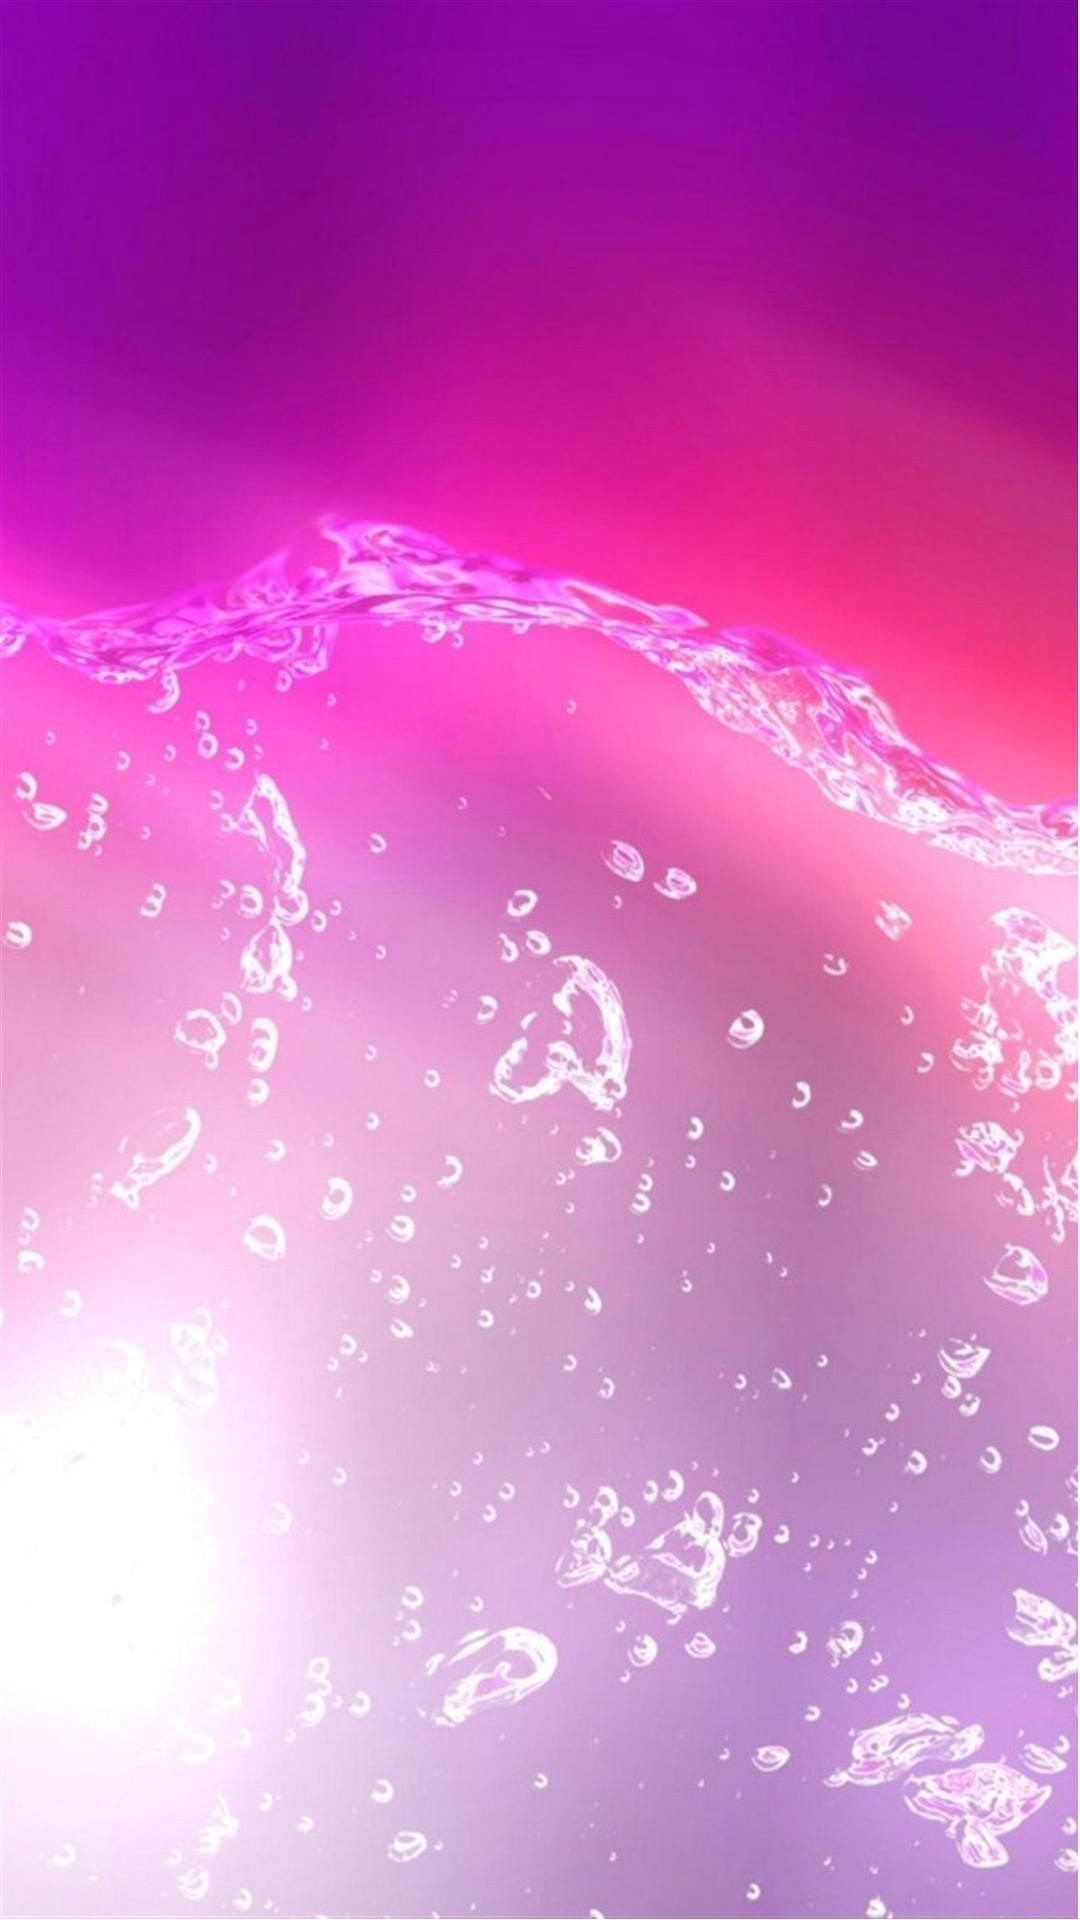 Galaxy S5 Pink Water Wallpaper Download Free – TimeDoll iPhone7, /